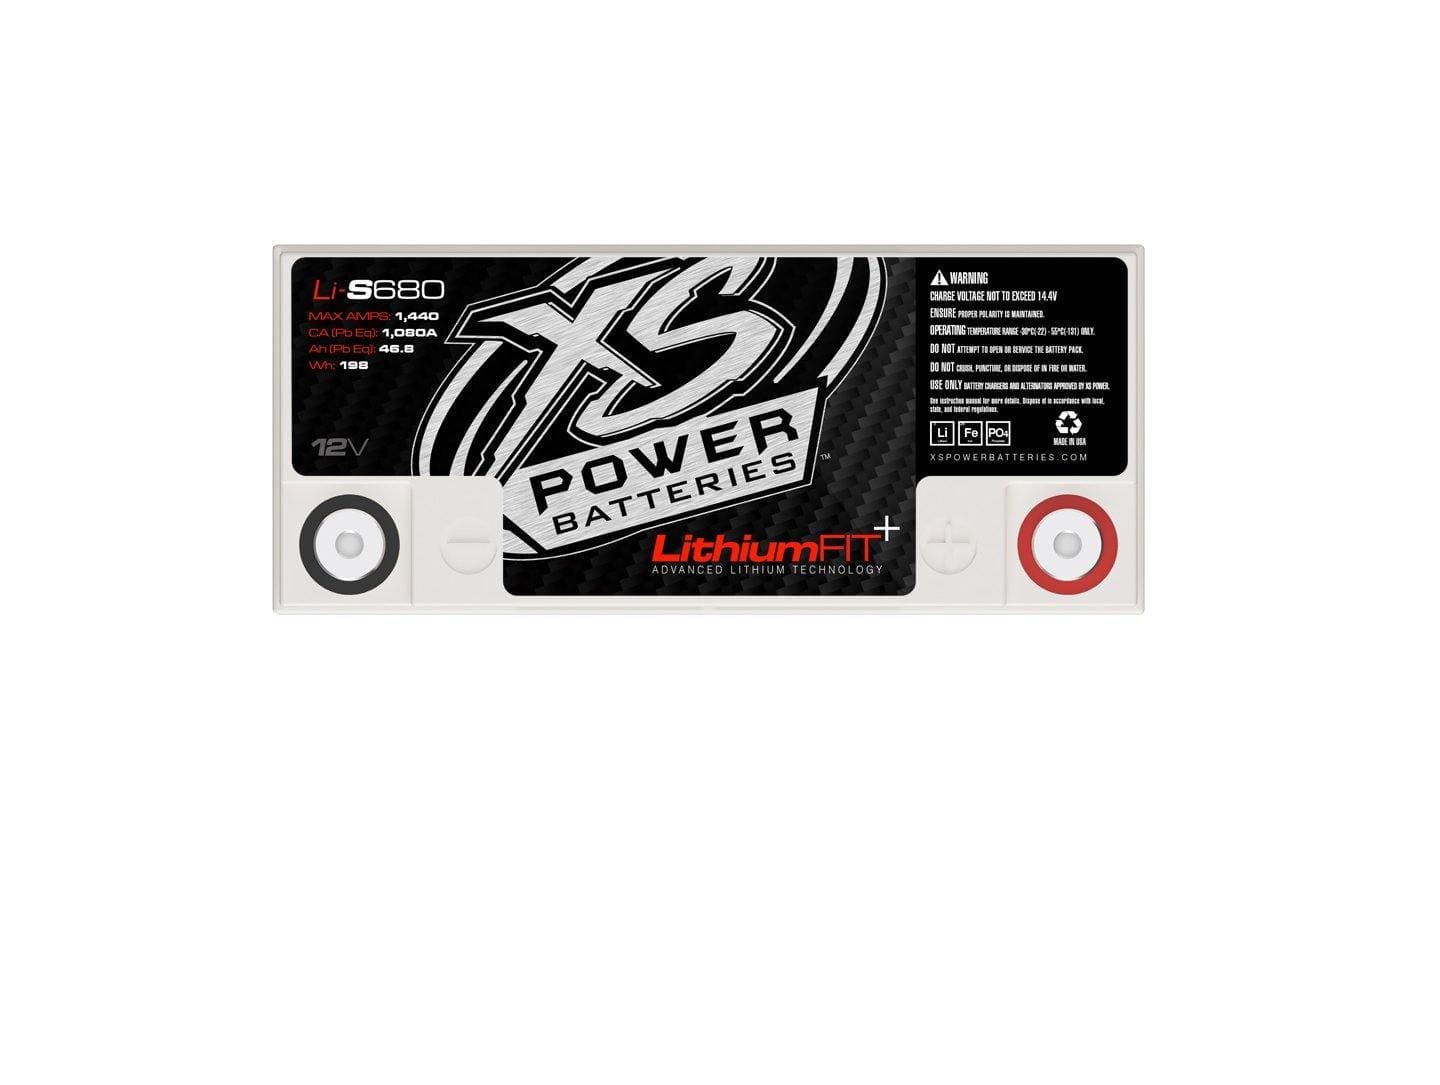 XS Power LI-S680 Lithium Victory Lithium Battery | Garage Bagger Stereo